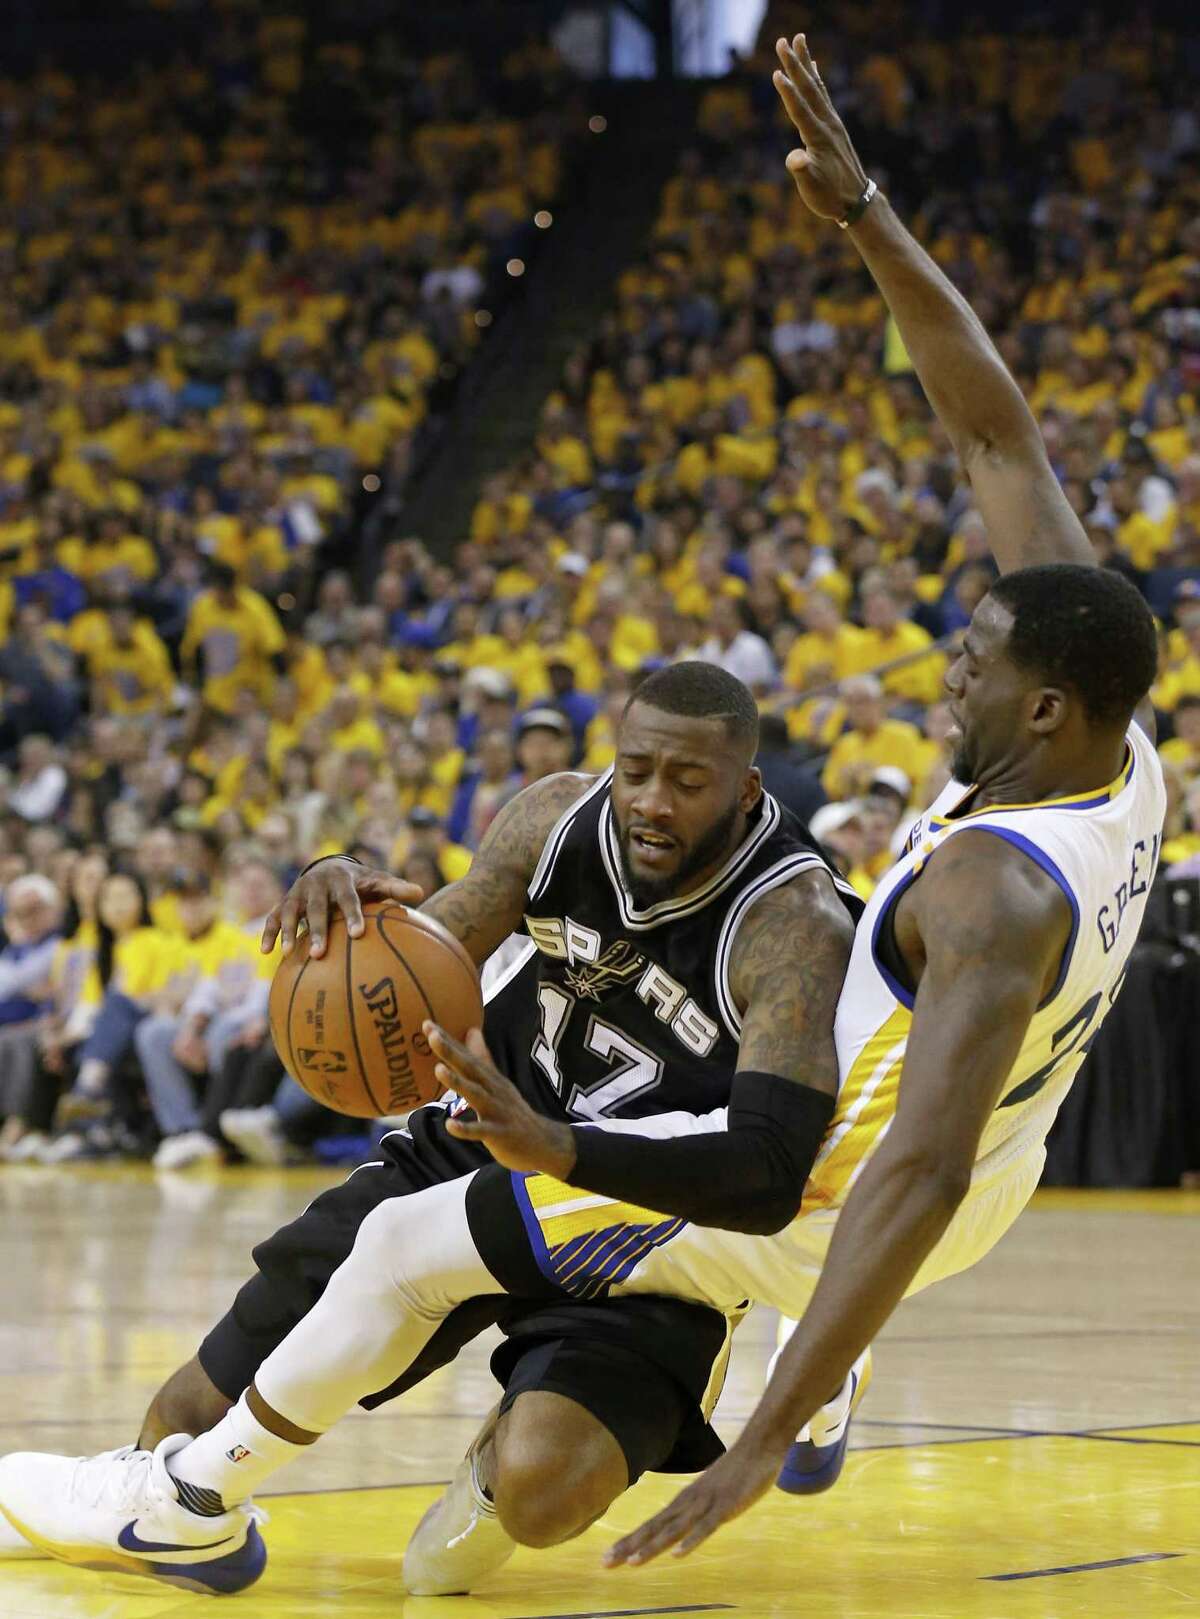 Spurs’ Jonathon Simmons slips as he drives around the Golden State Warriors’ Draymond Green during first half action of Game 1 in the Western Conference finals on May 14, 2017 at Oracle Arena in Oakland, Calif.